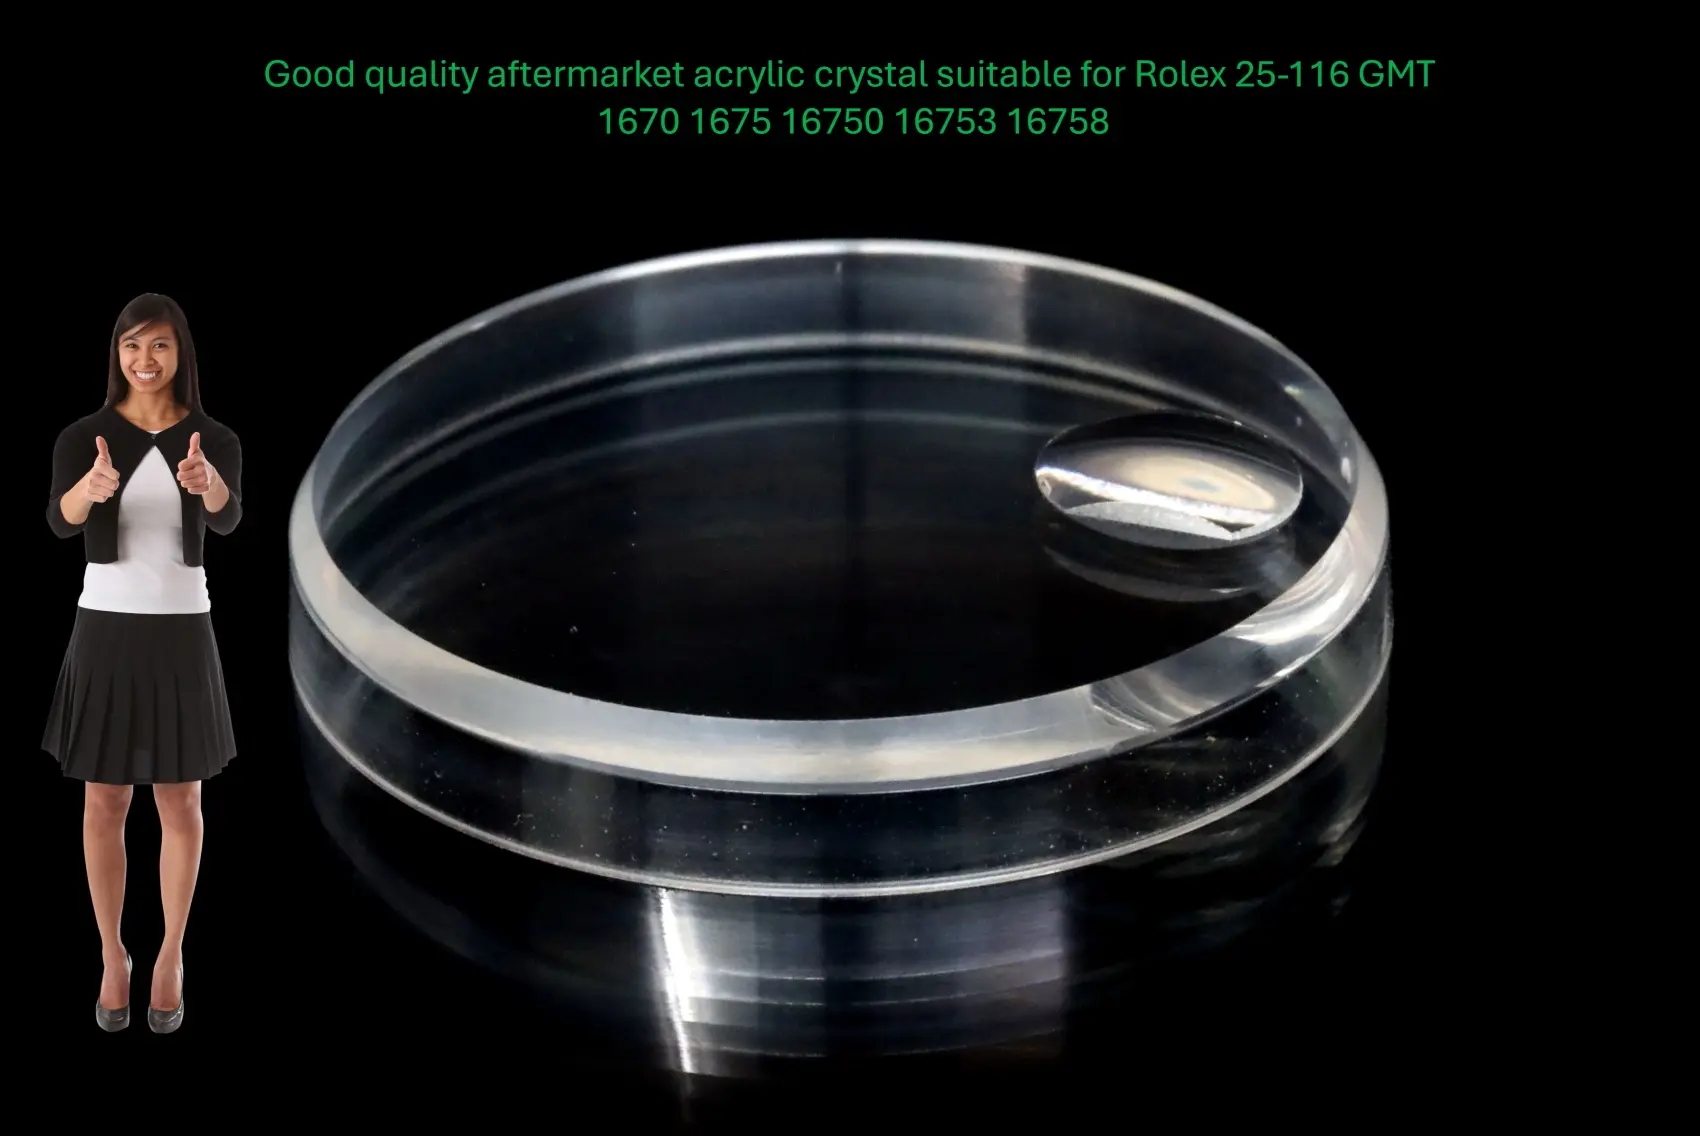 Acrylic crystal suitable for Rolex 25-116 GMT 1670/1675/16750/16753/16758